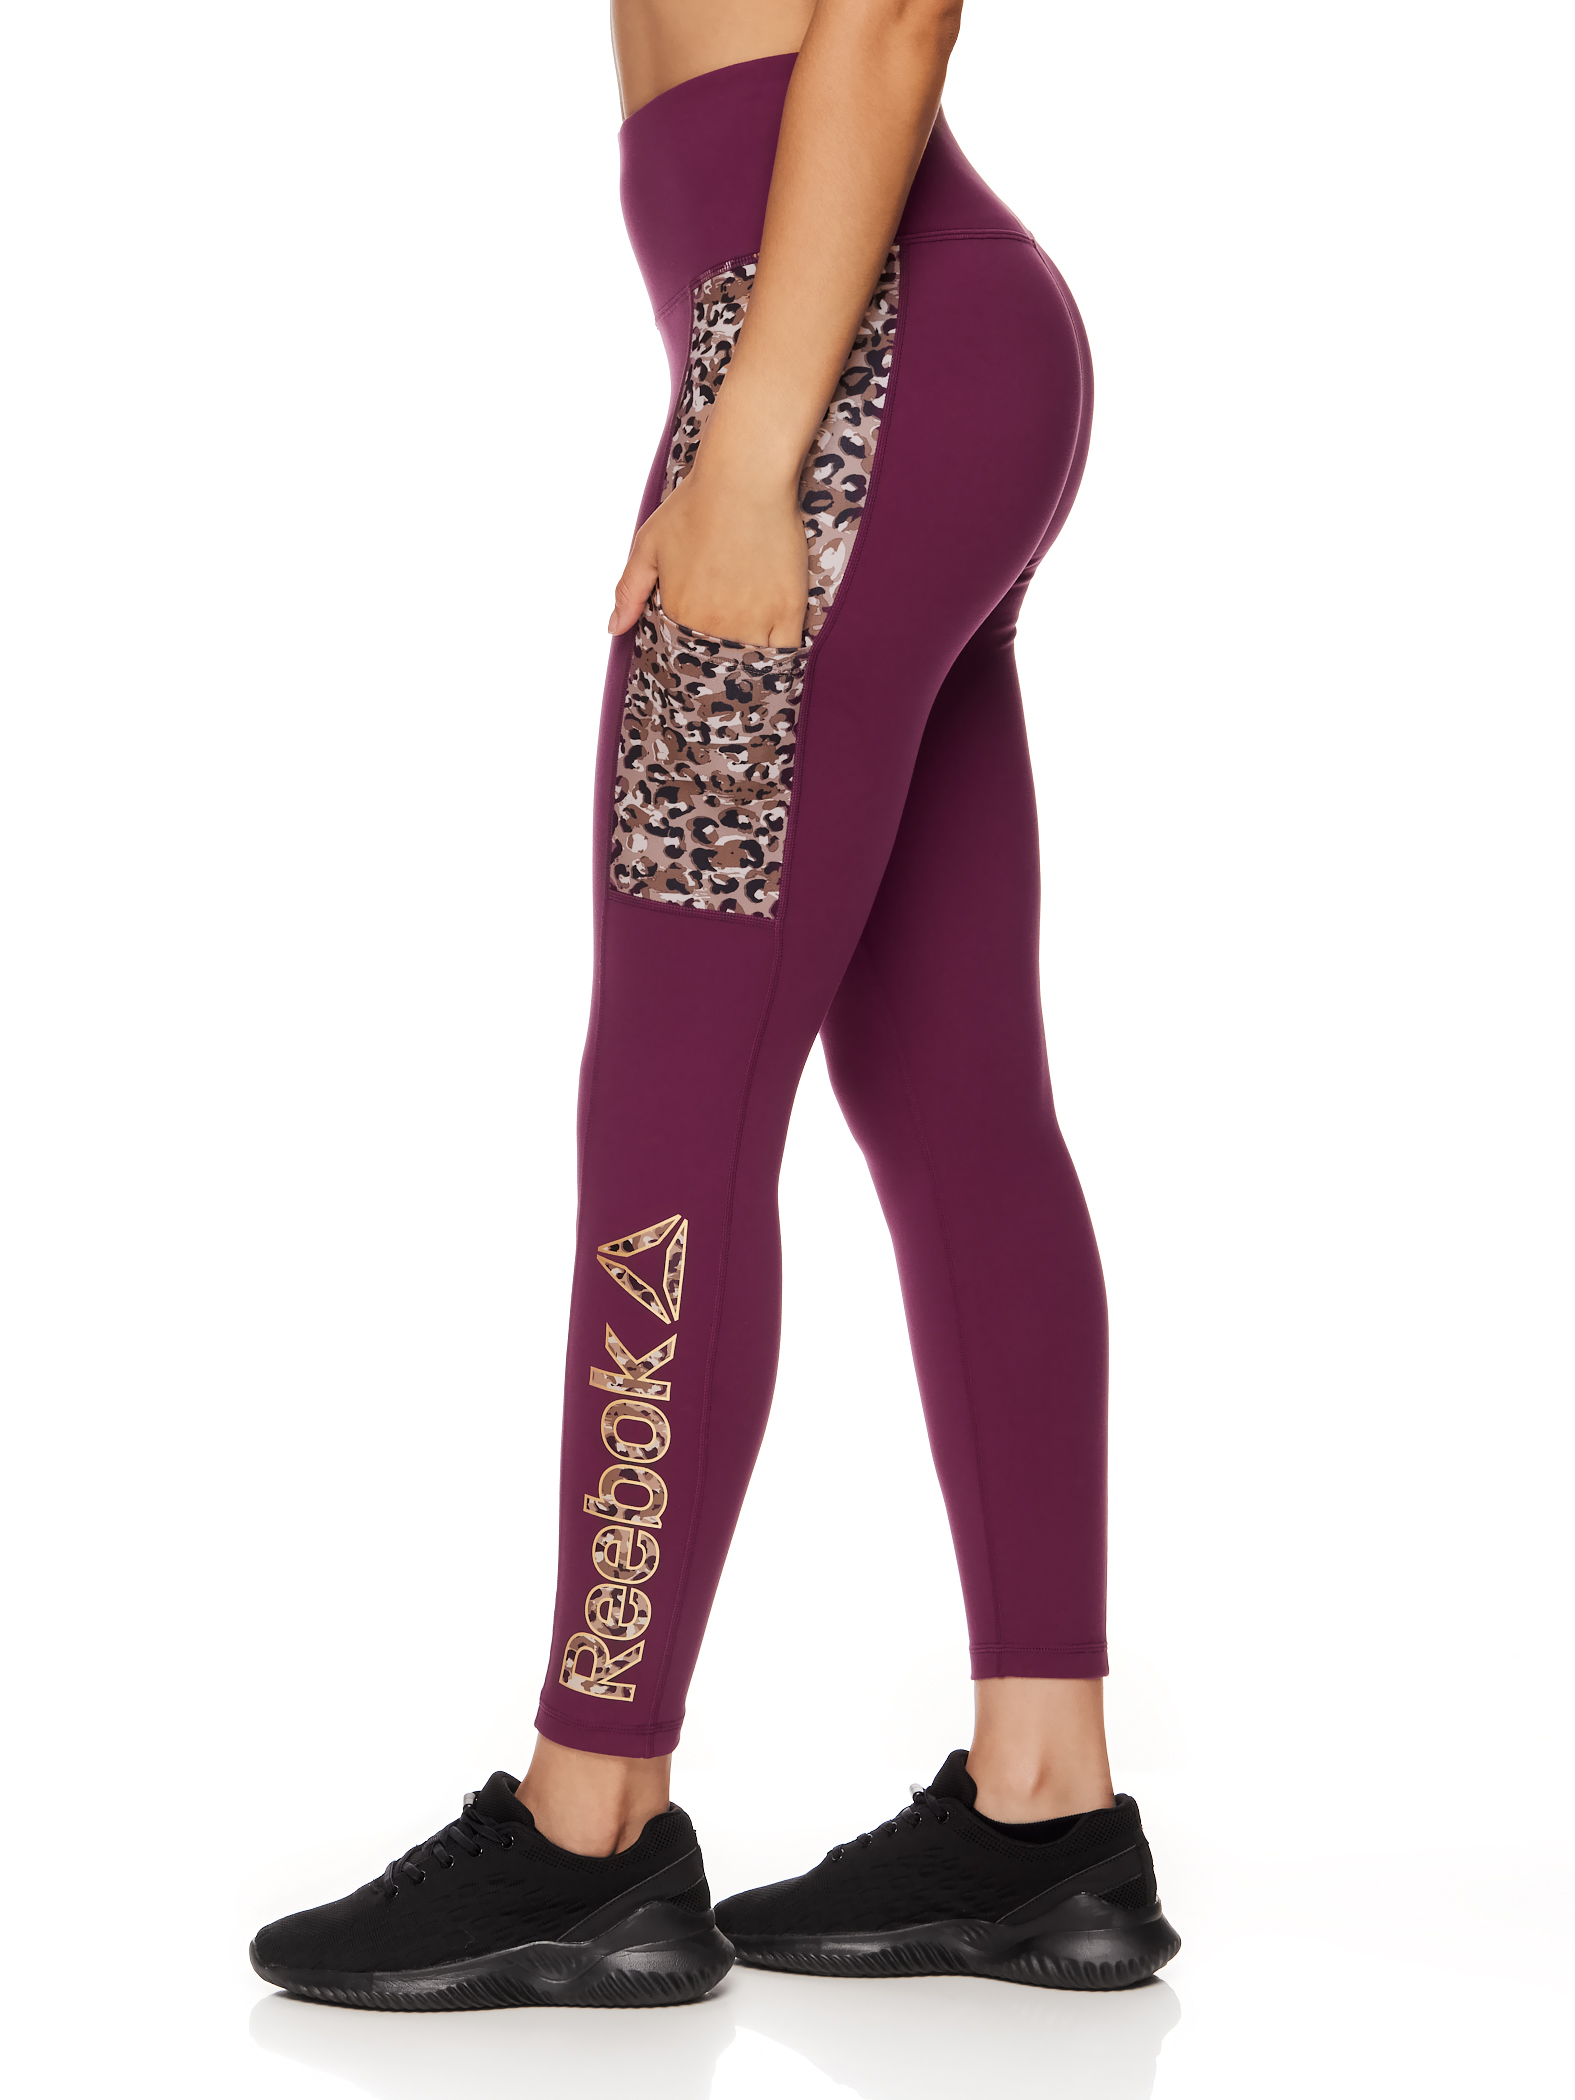 Reebok Women's Printed Motion High Rise 7/8 Legging with Side Pocket - image 4 of 4